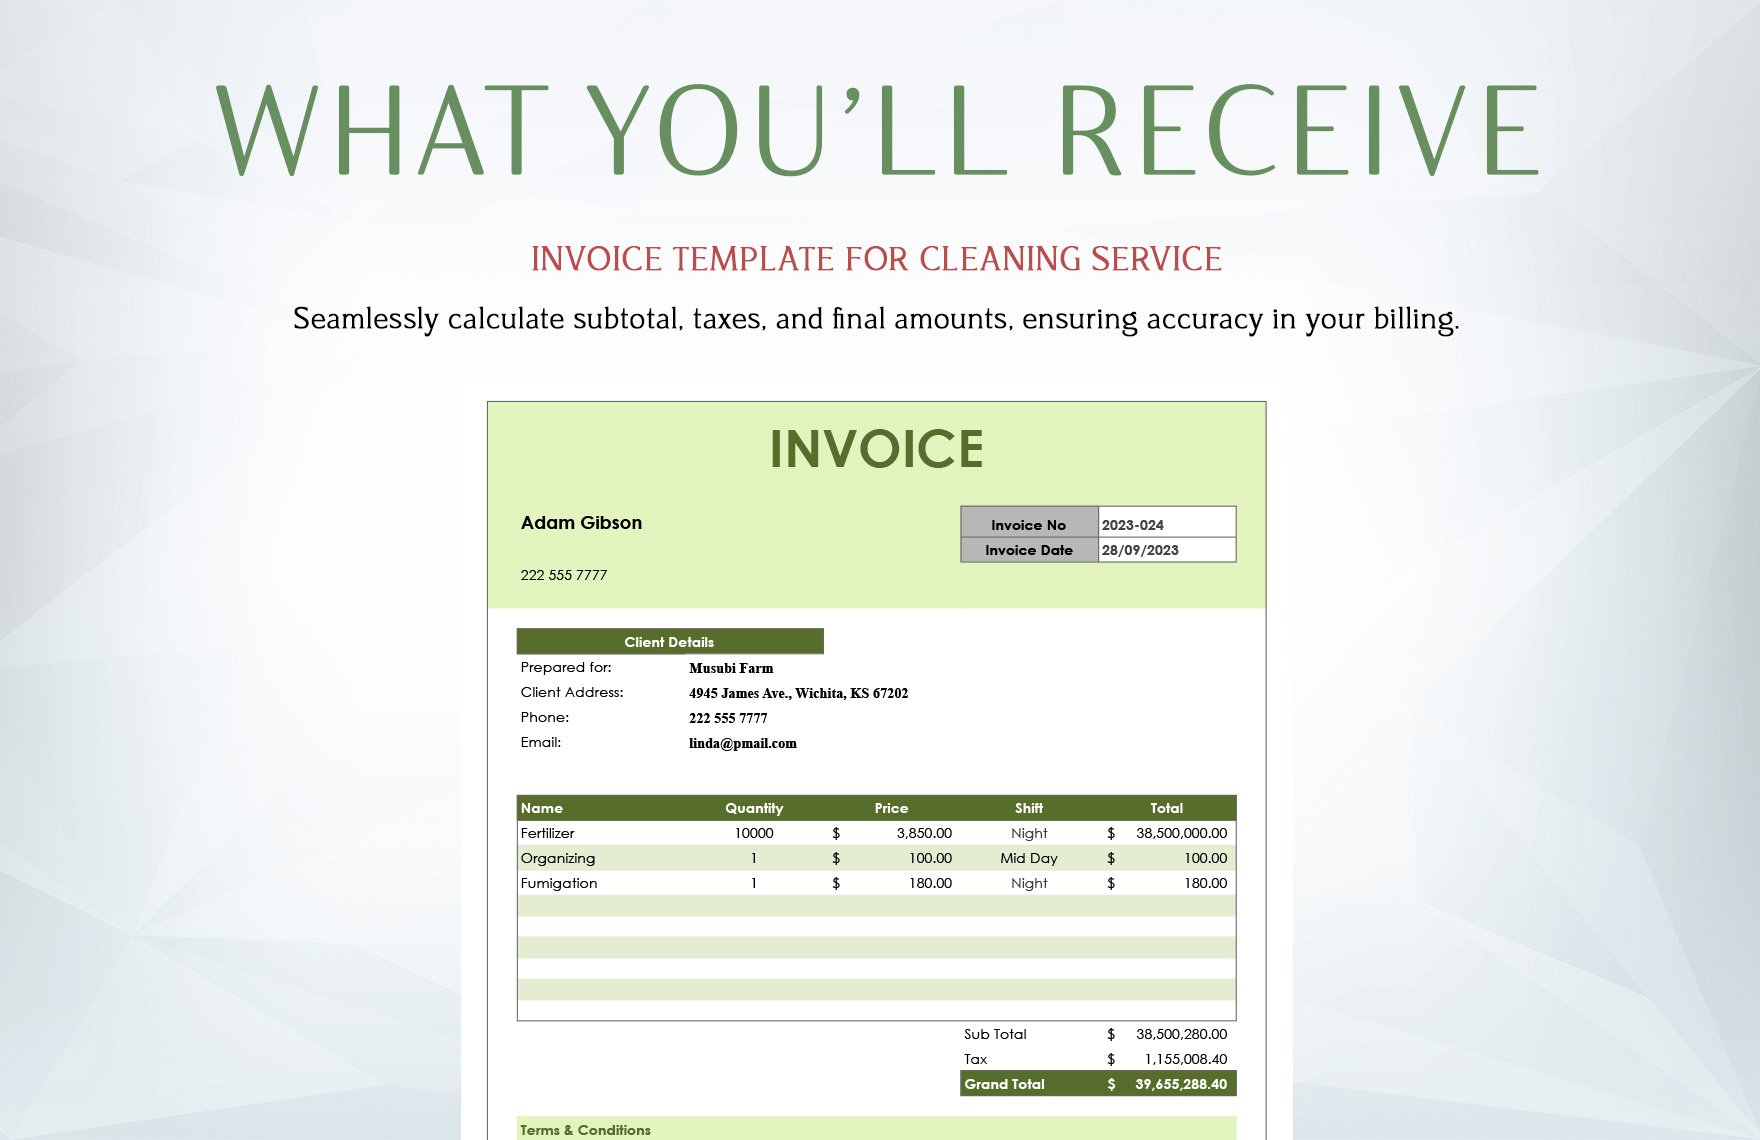 Invoice Template for Cleaning Service